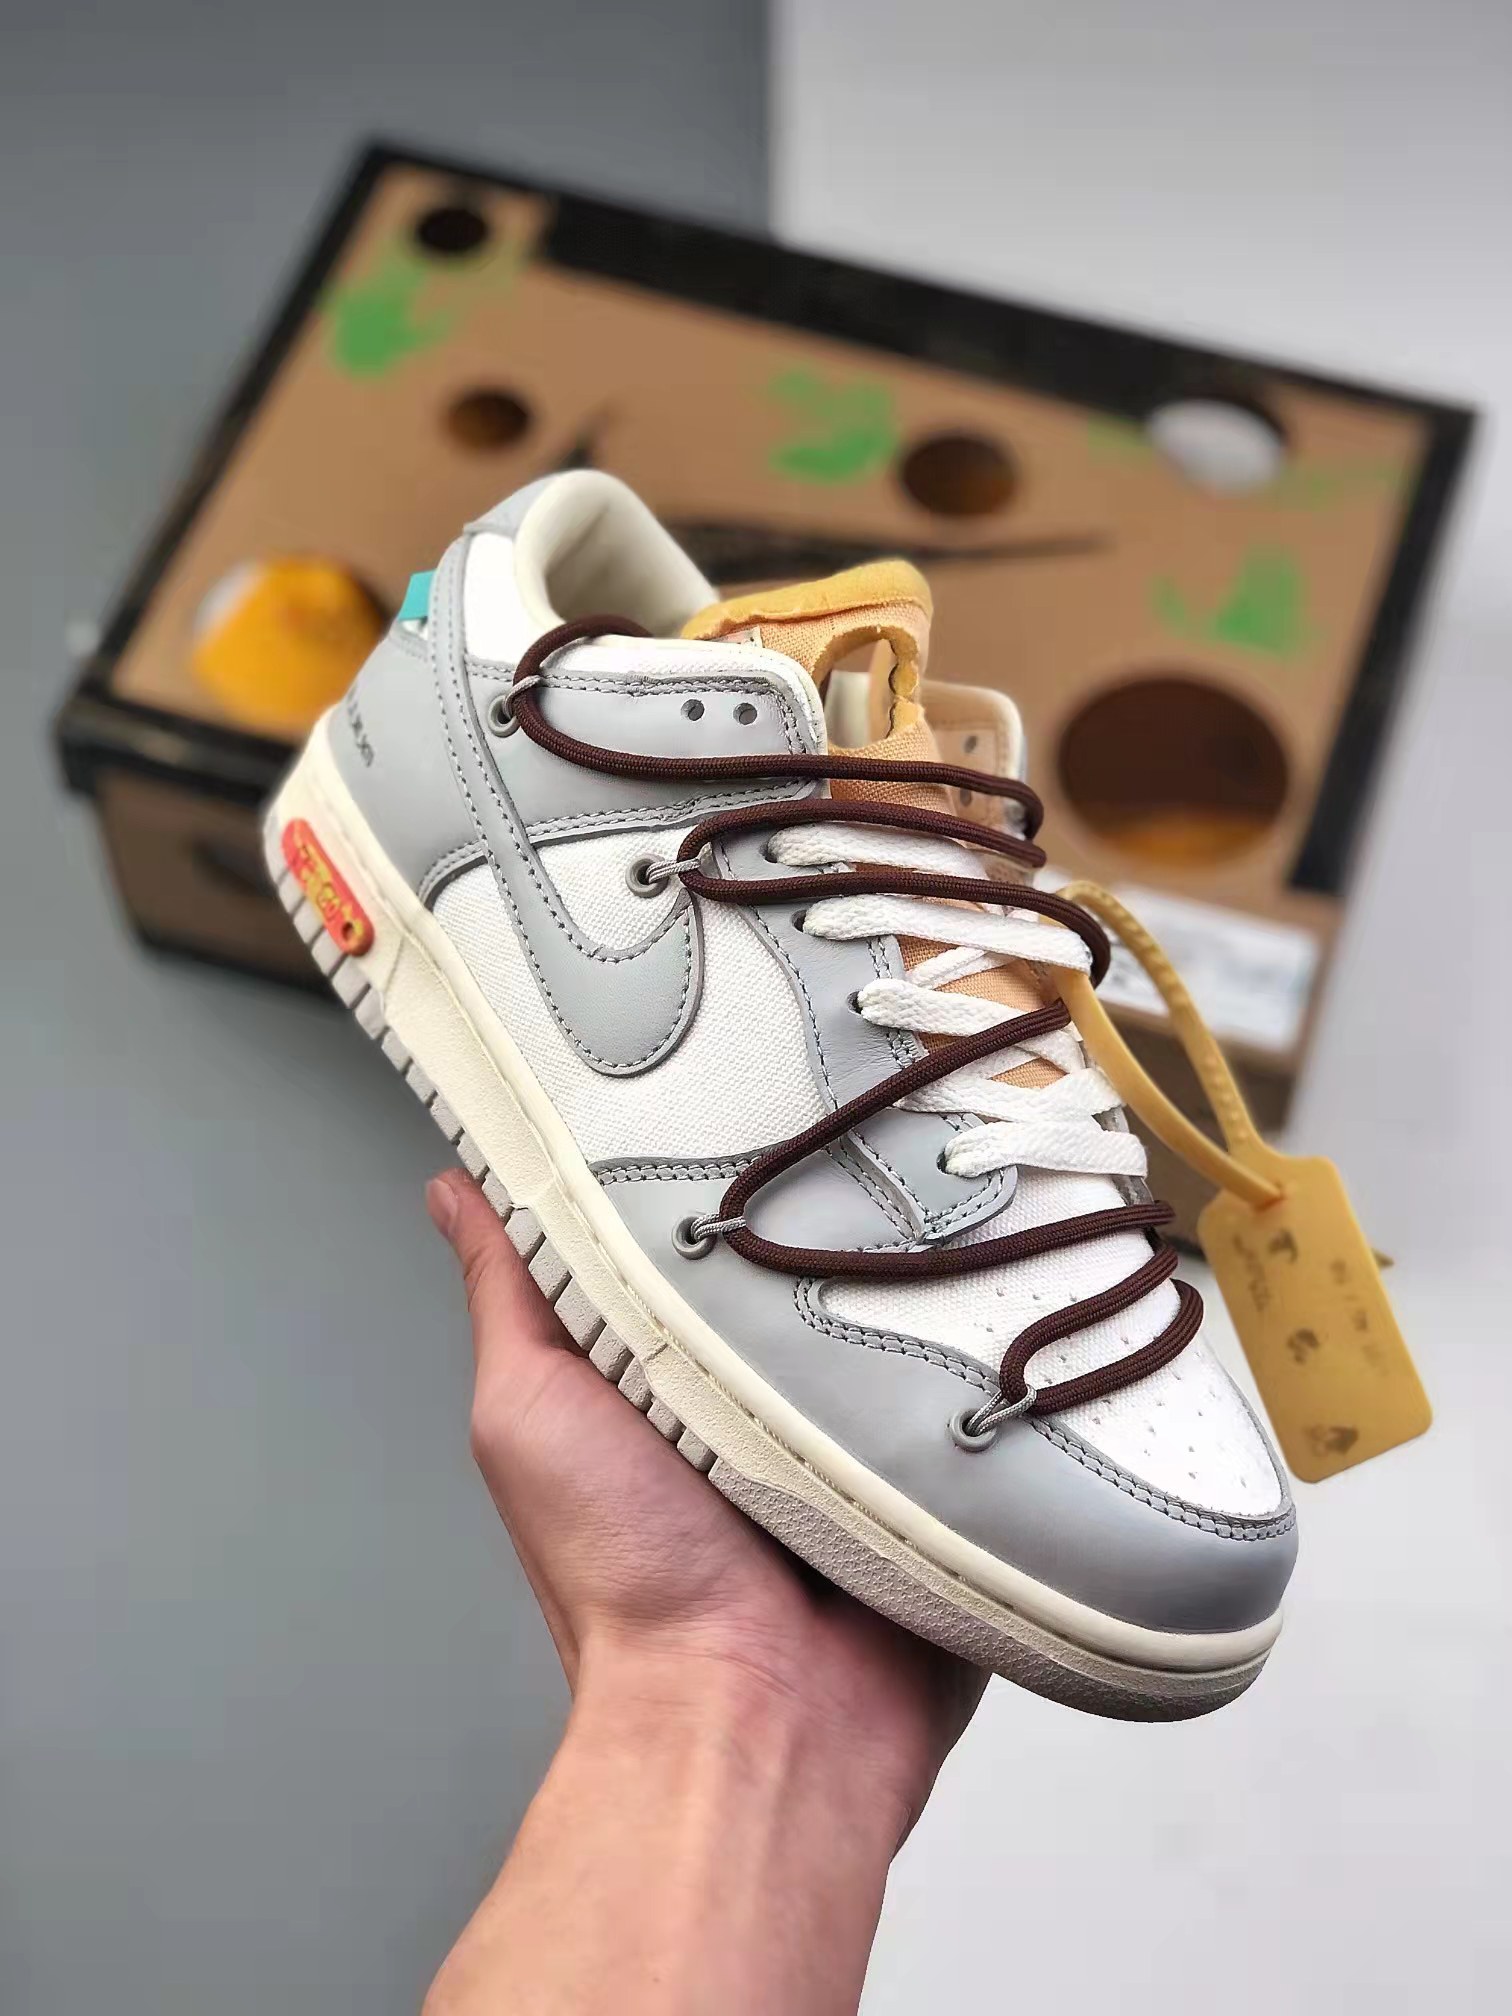 Nike Off-White x Dunk Low 'Lot 46 of 50' DM1602-102 - Limited Edition Collaboration Sneakers